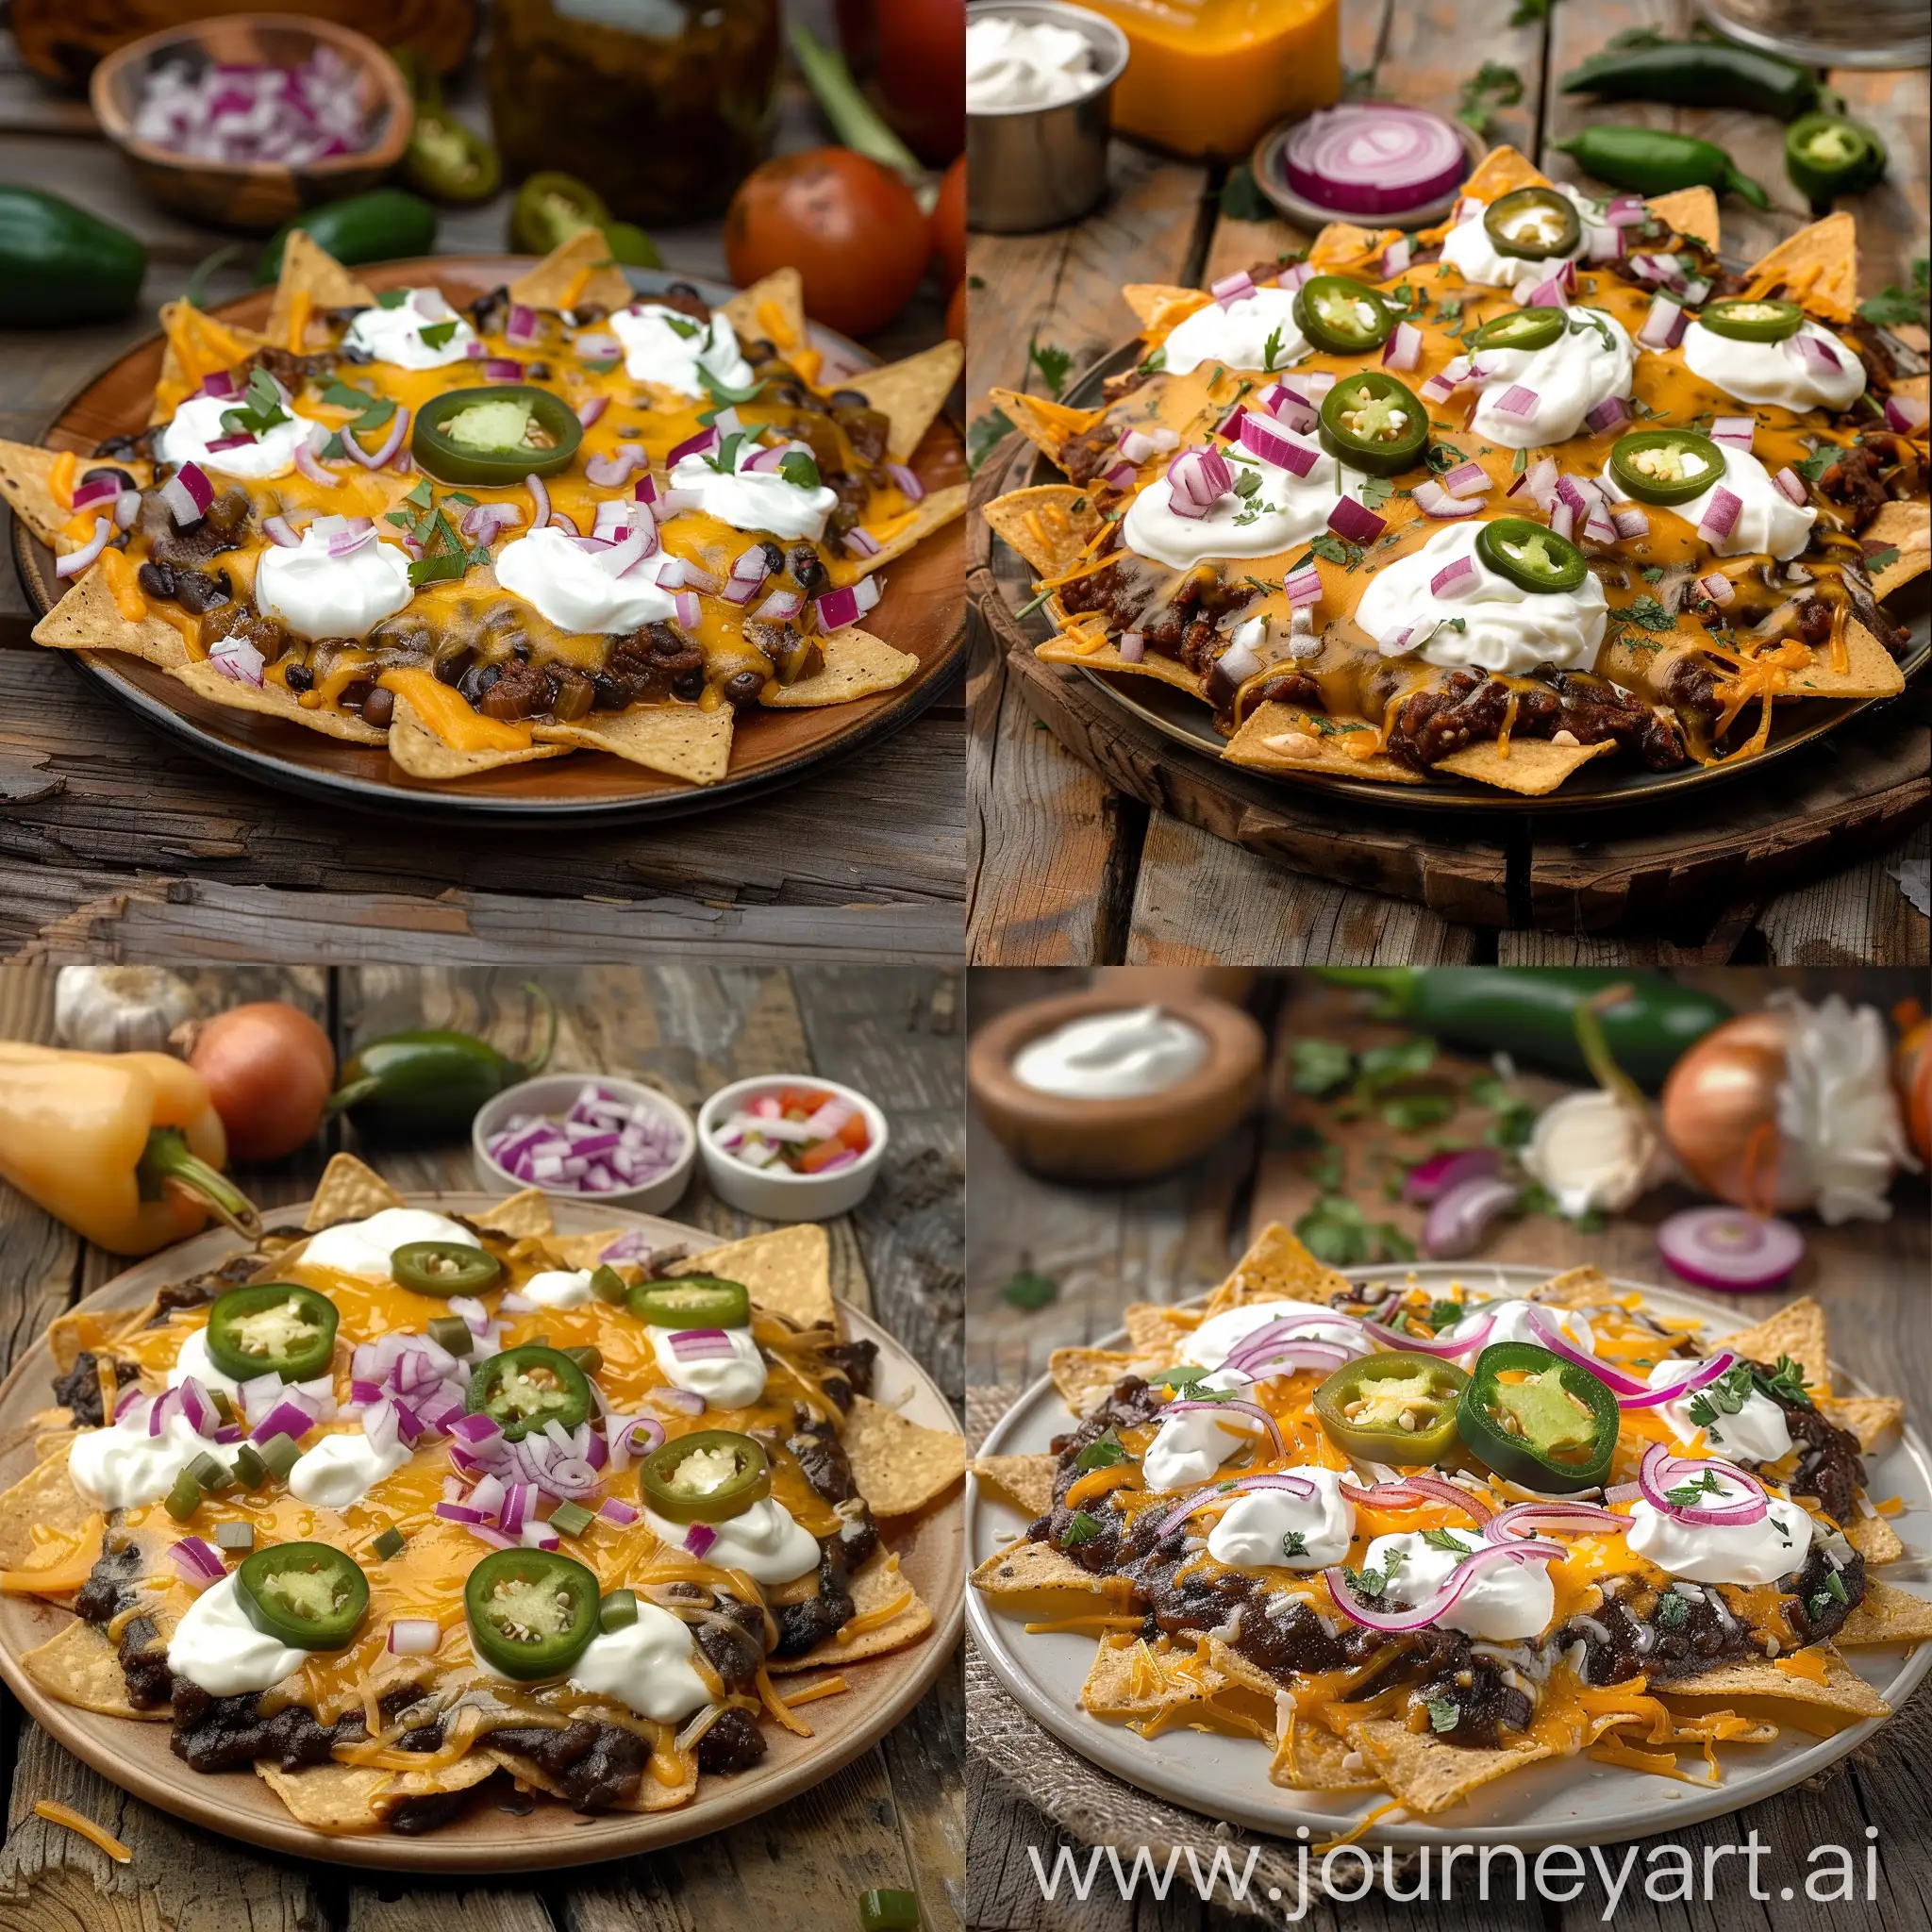 extremely photo realistic commercial image of staged black even stew on plate of round nachos with sour cream evenly spread, melted cheese on top, chopped red onion and chopped jalapeno as topping, background should contain some good looking ingridients on torn wood table, aestetics should be rustic